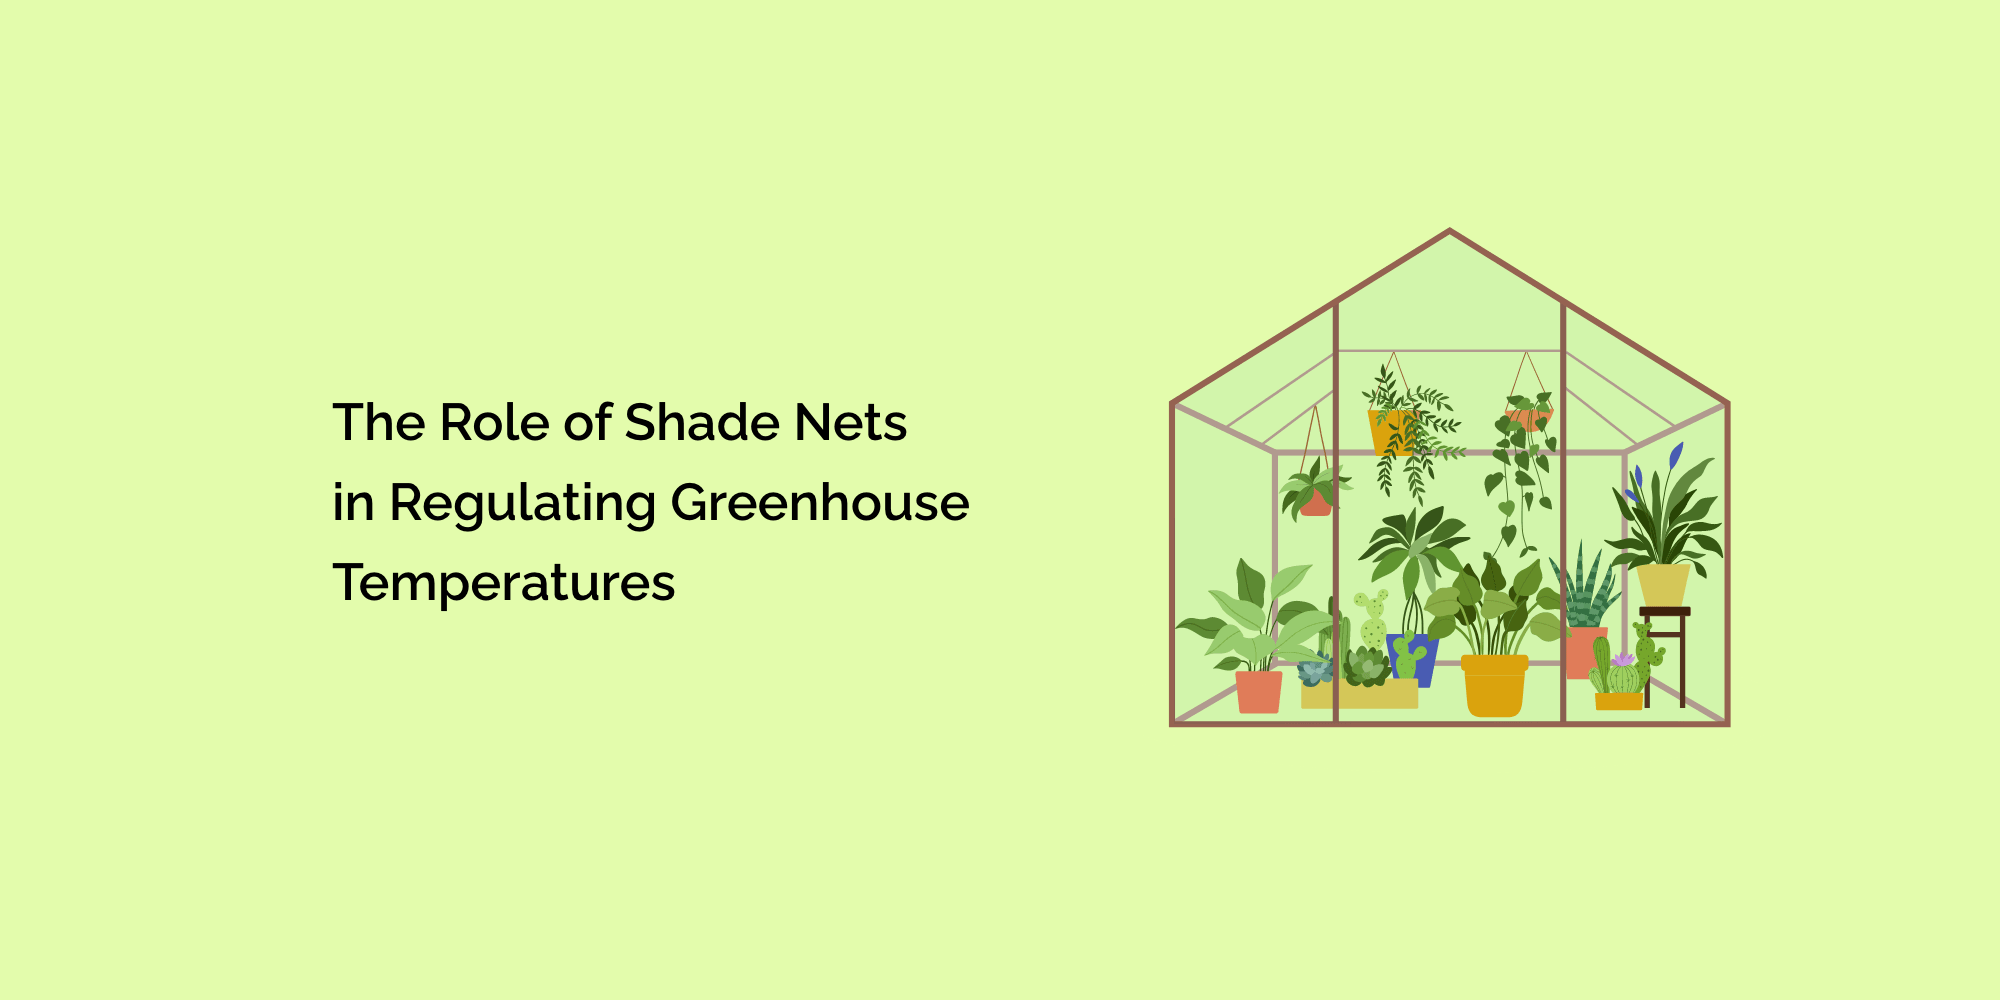 The Role of Shade Nets in Regulating Greenhouse Temperatures